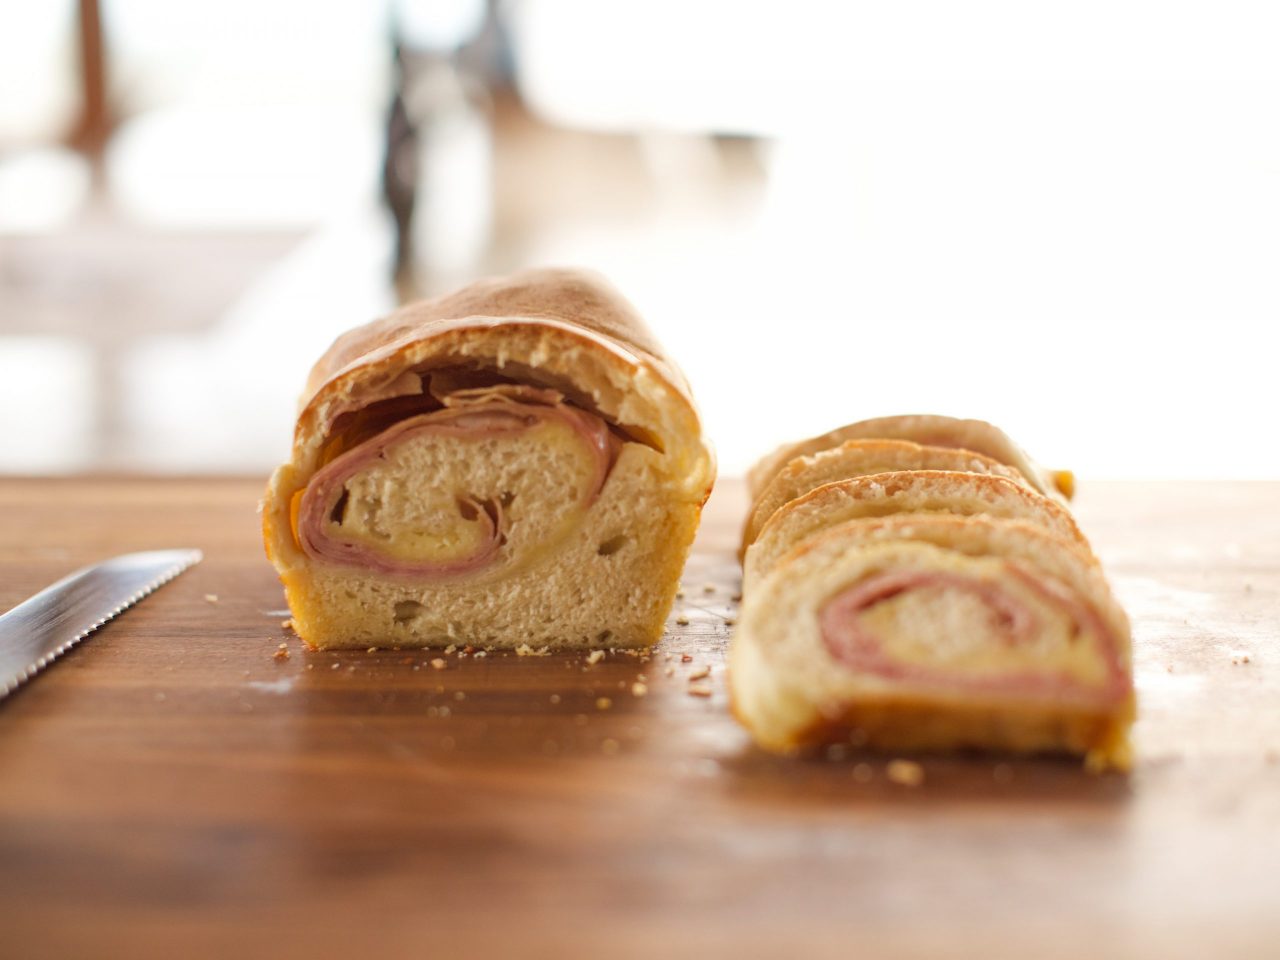 Ree Drummond's Ham and Cheese Loaf, as seen on The Pioneer Woman